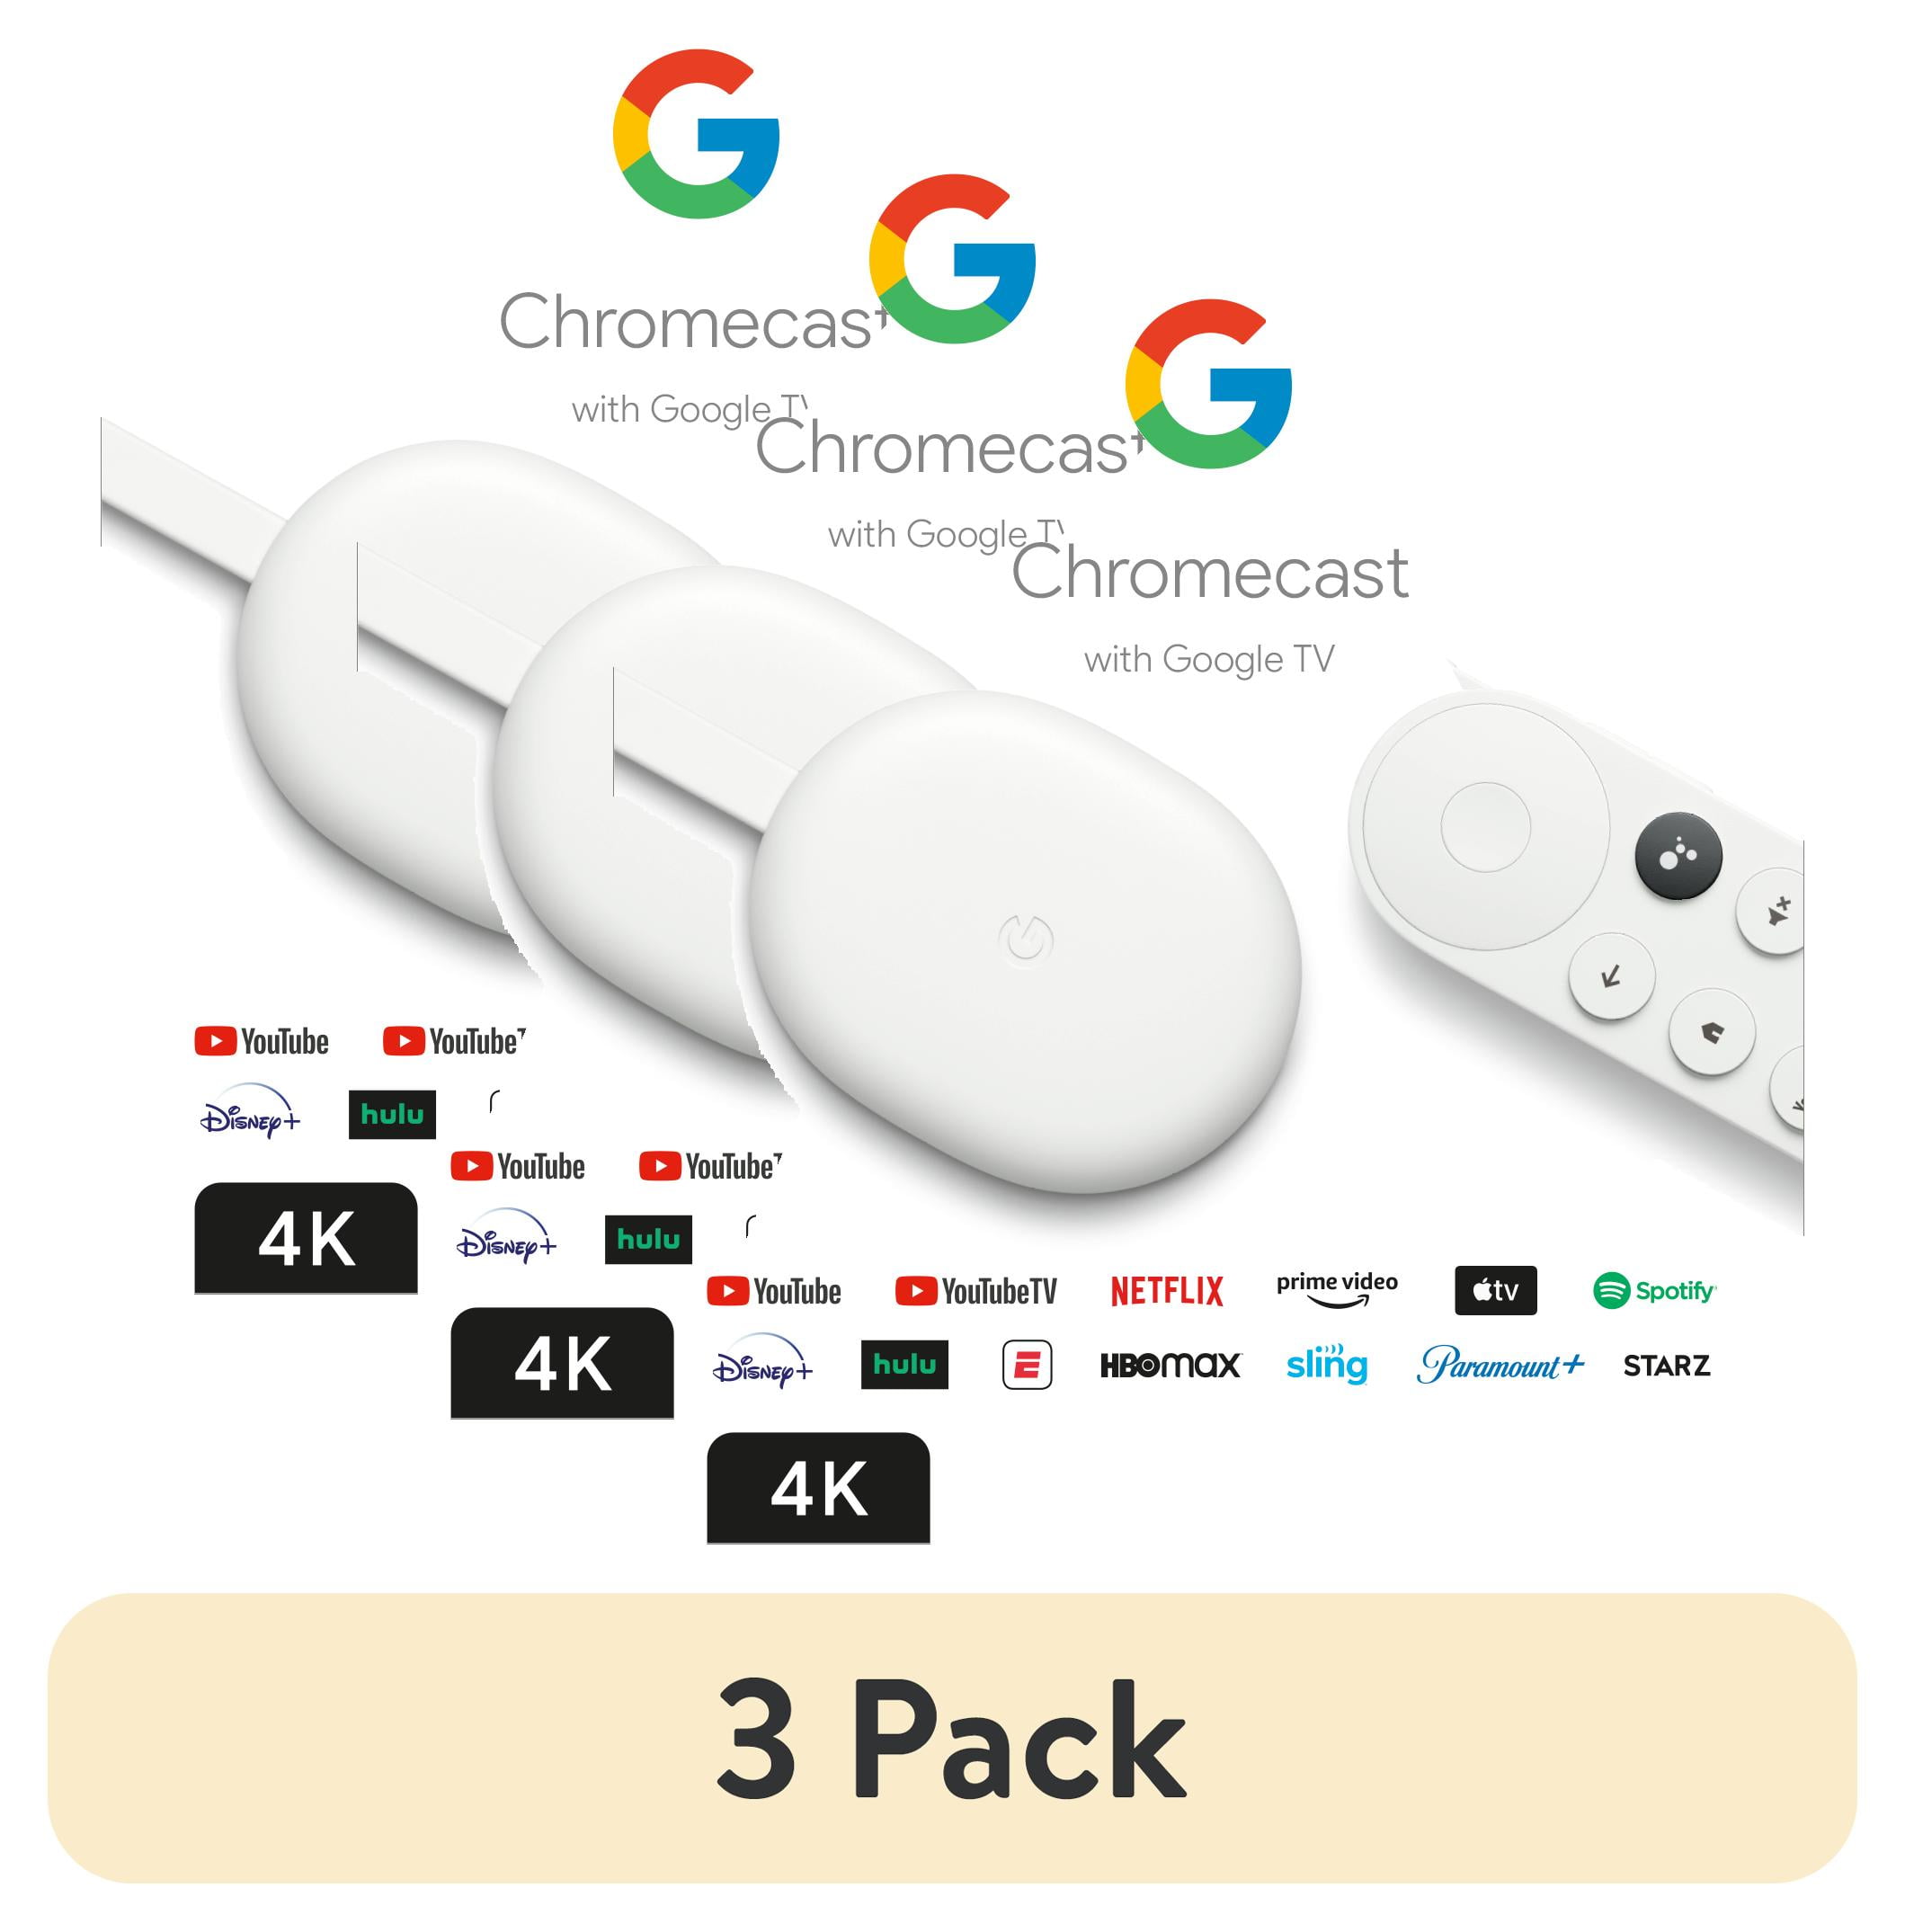 (3 pack) Chromecast with Google TV - Streaming Entertainment in 4K HDR